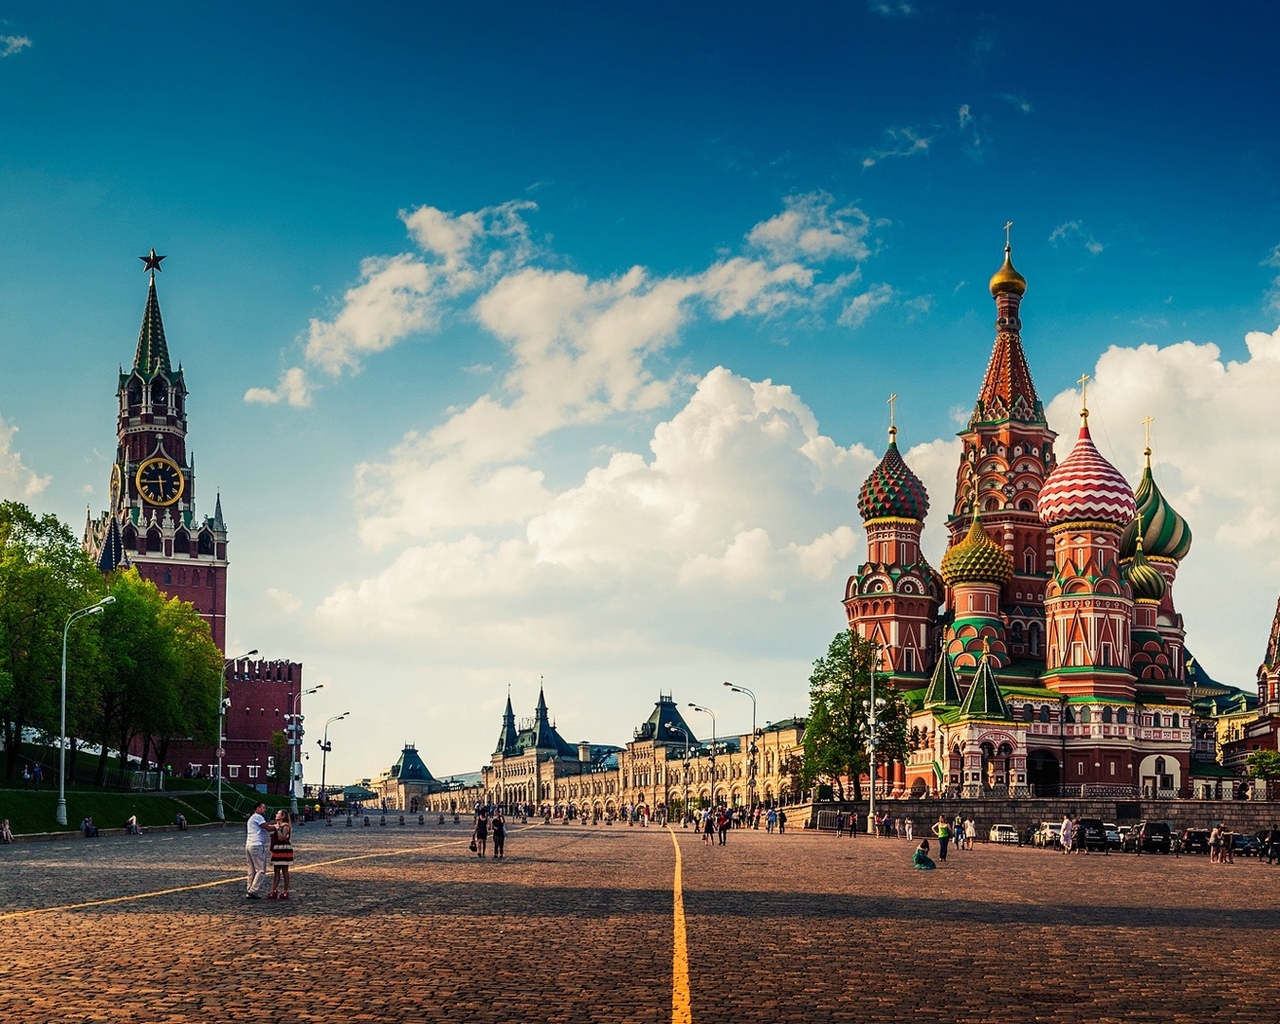 Image: Moscow, temple, Cathedral, Red square, Spasskaya tower, Kremlin, chimes, people, sky, clouds